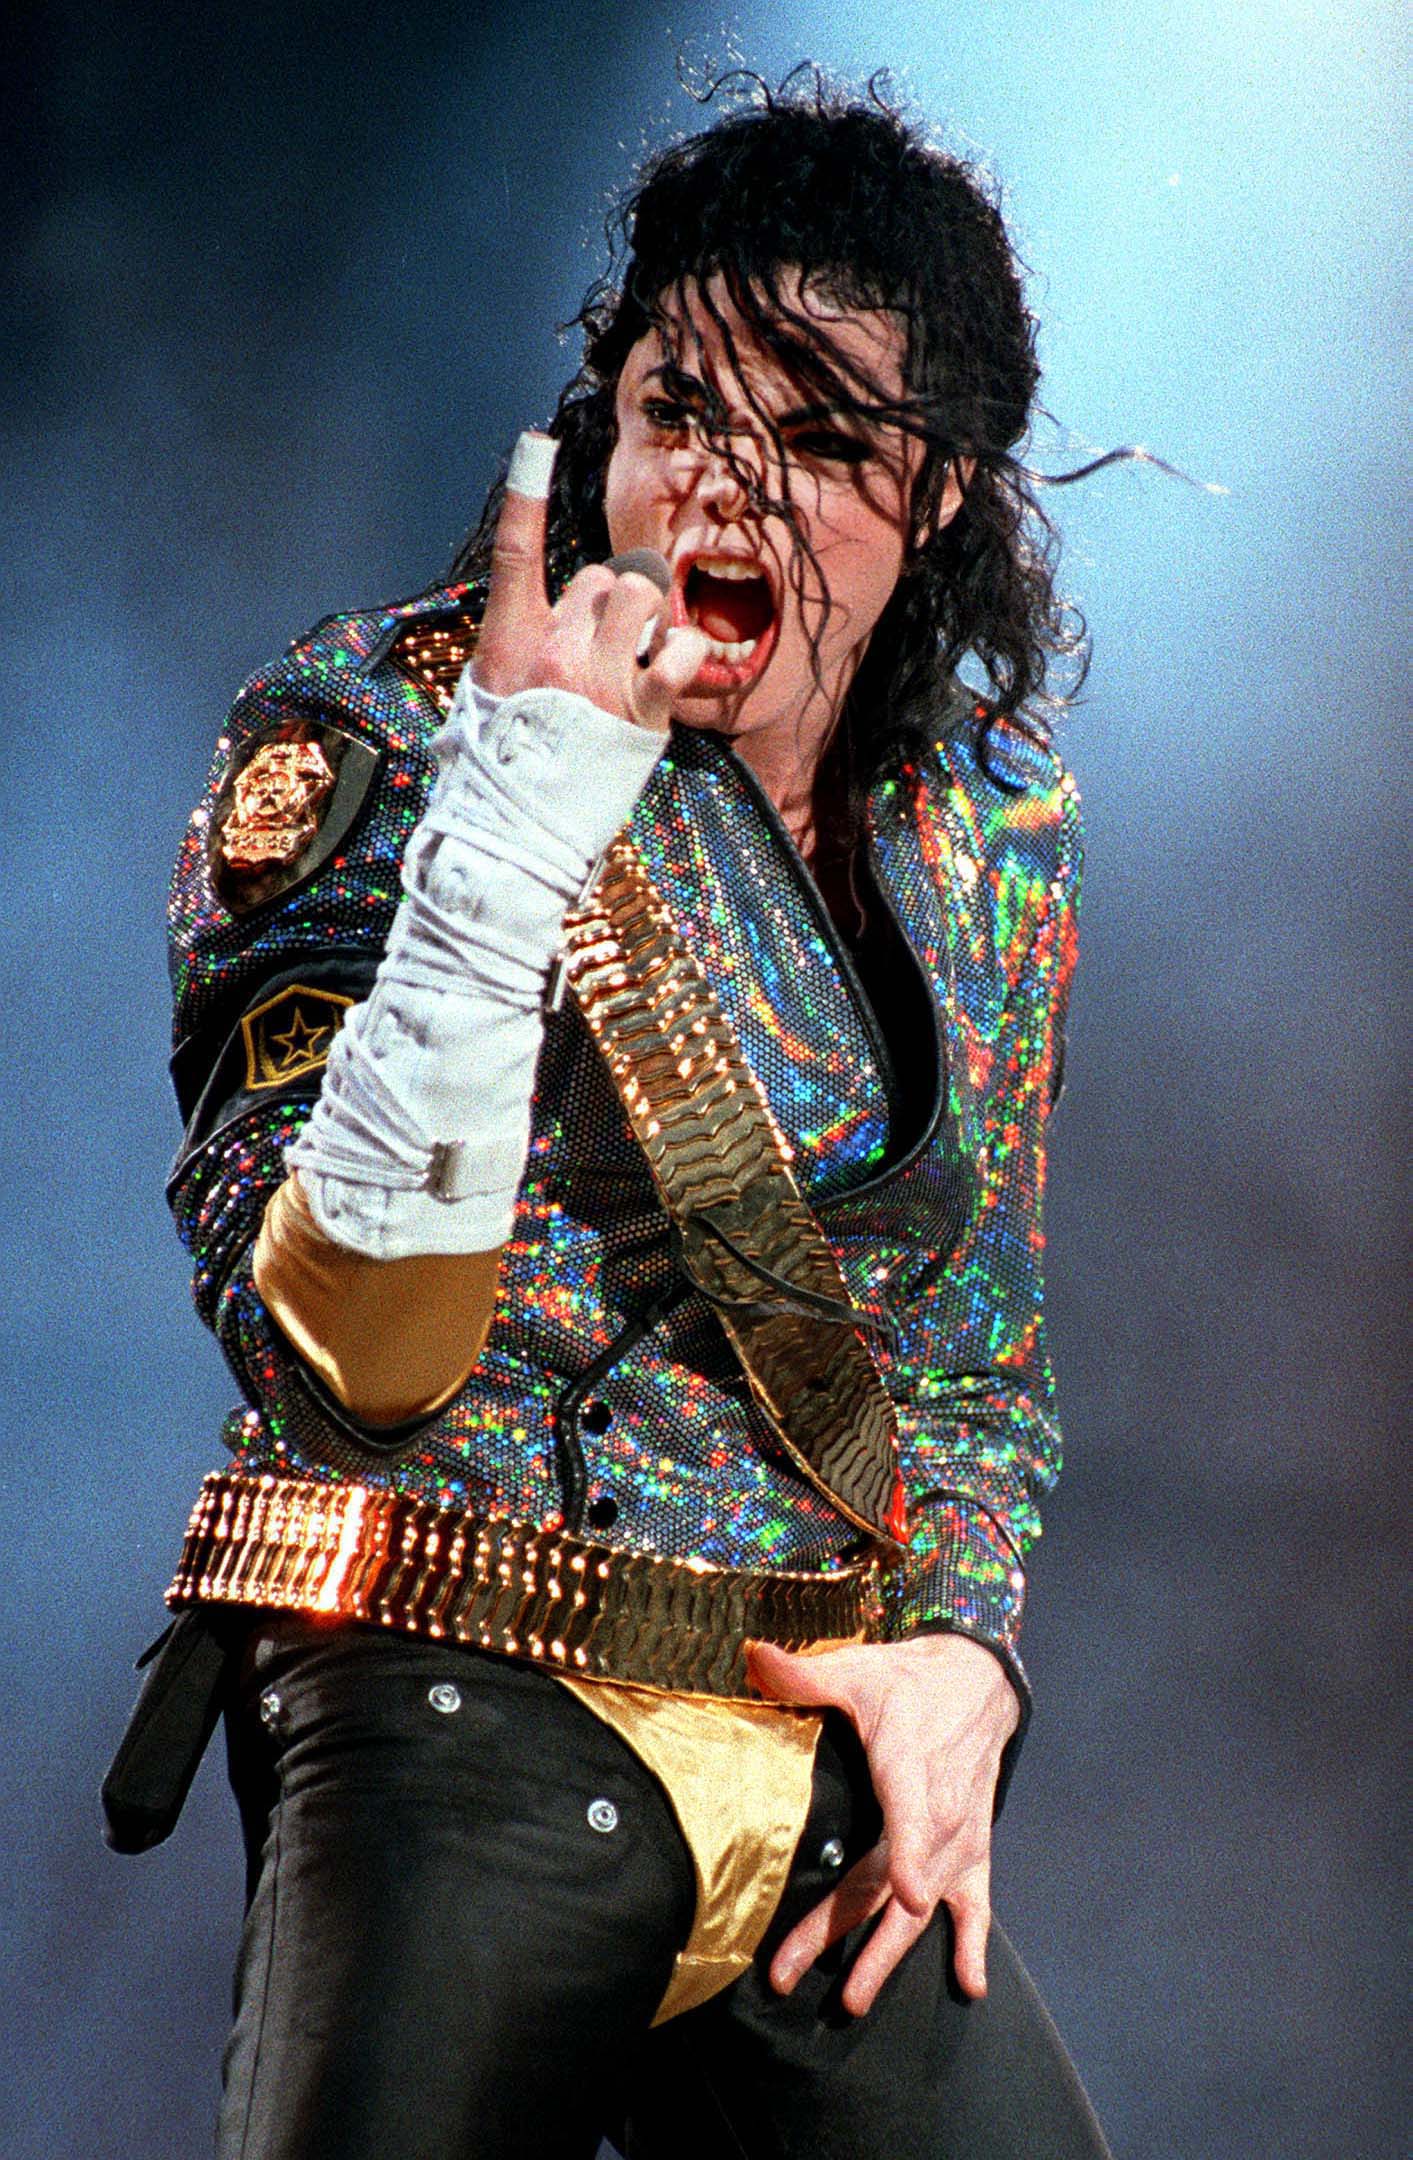 Michael Jackson performing on stage on August 18, 1992 | Source: Getty Images